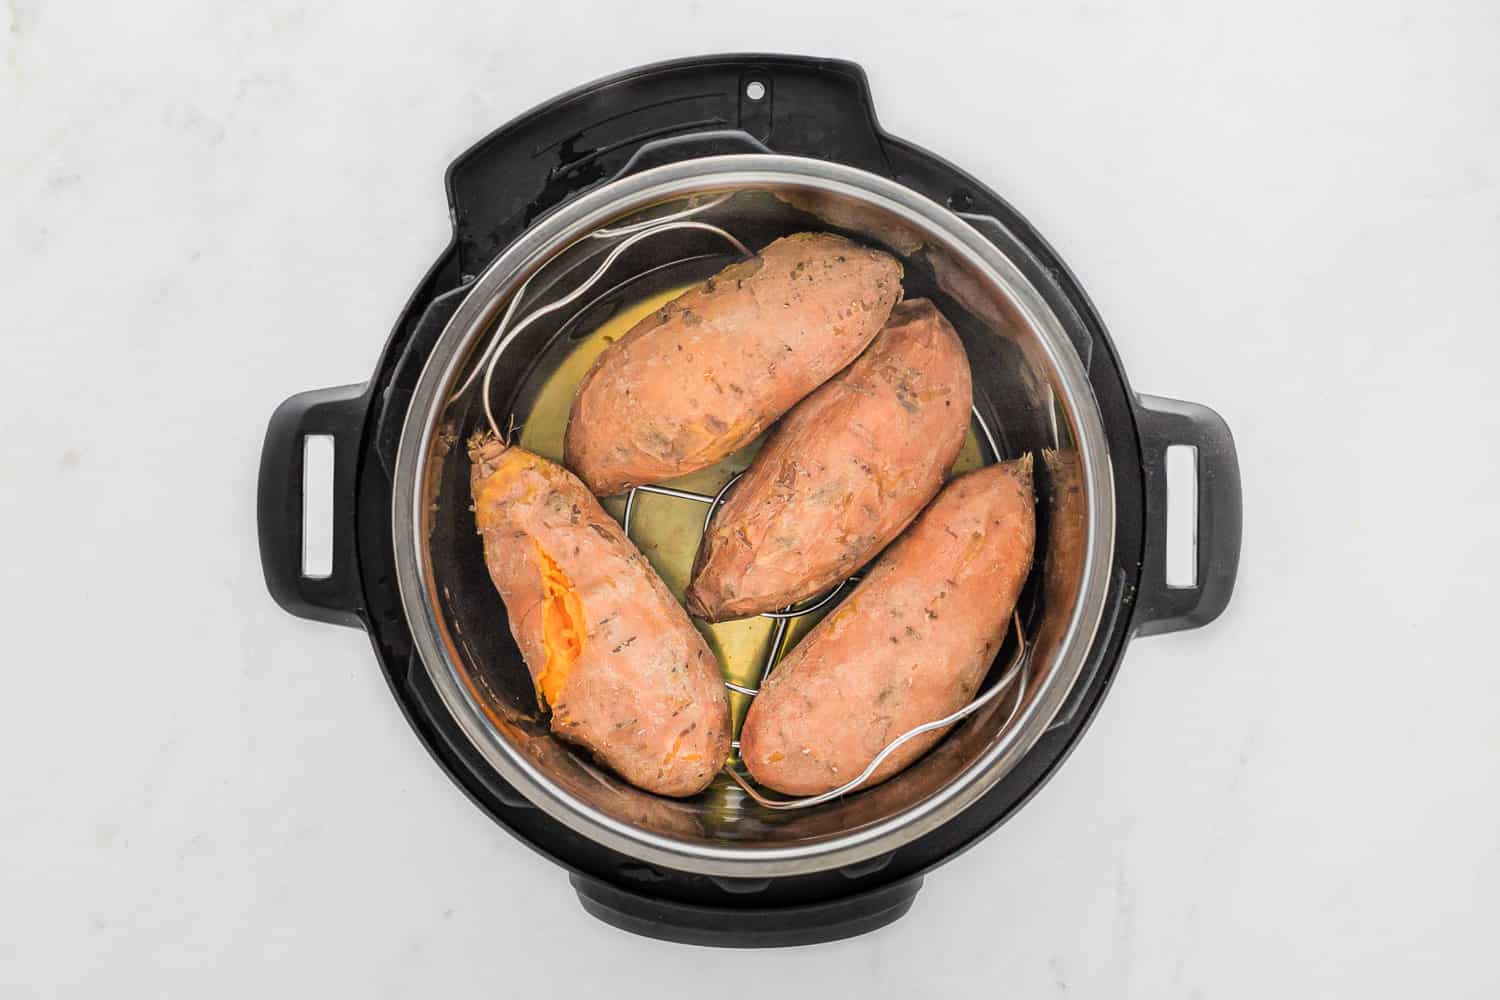 Instant pot sweet potatoes after being cooked.